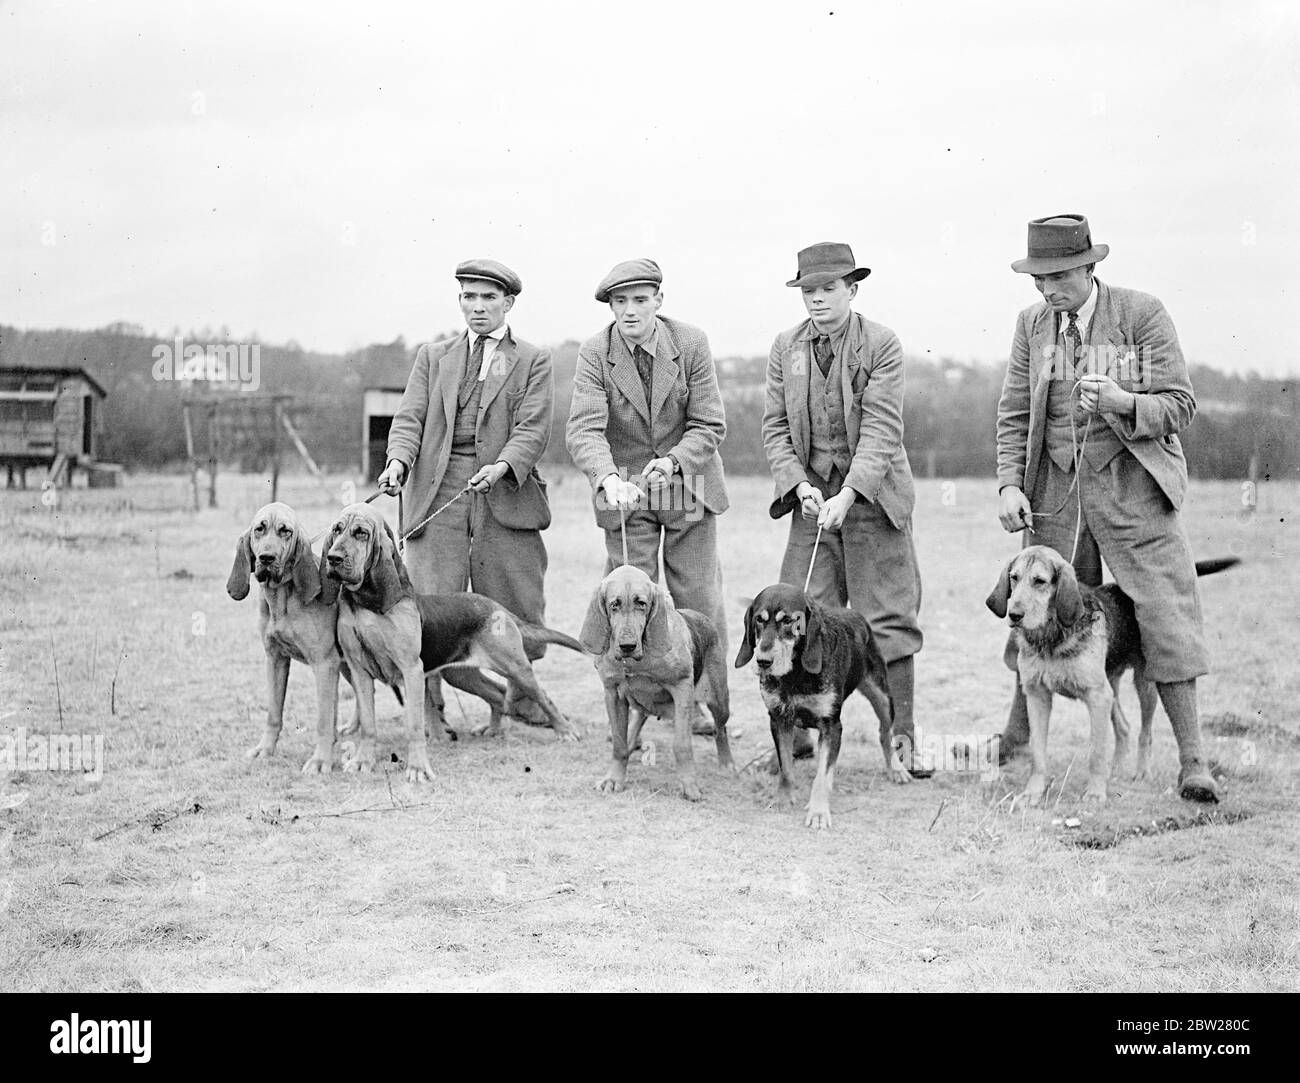 Dogs trained for police duties at Berkshire kennels. 30 dogs, some of them mongrels, which will eventually accompany a London policeman on lonely beats, are being trained under a Home Office experiment for police duties at Washwater, near Newbury, Berkshire. The animals are taught to guard a policeman's cycle while he searches a house, to intercept anyone coming out, and even to search a house while the officer remained outside. Photo shows, some of the police hounds at the Berkshire kennels. On the left of three pure English bloodhounds and the other two are a cross between an otter and blood Stock Photo